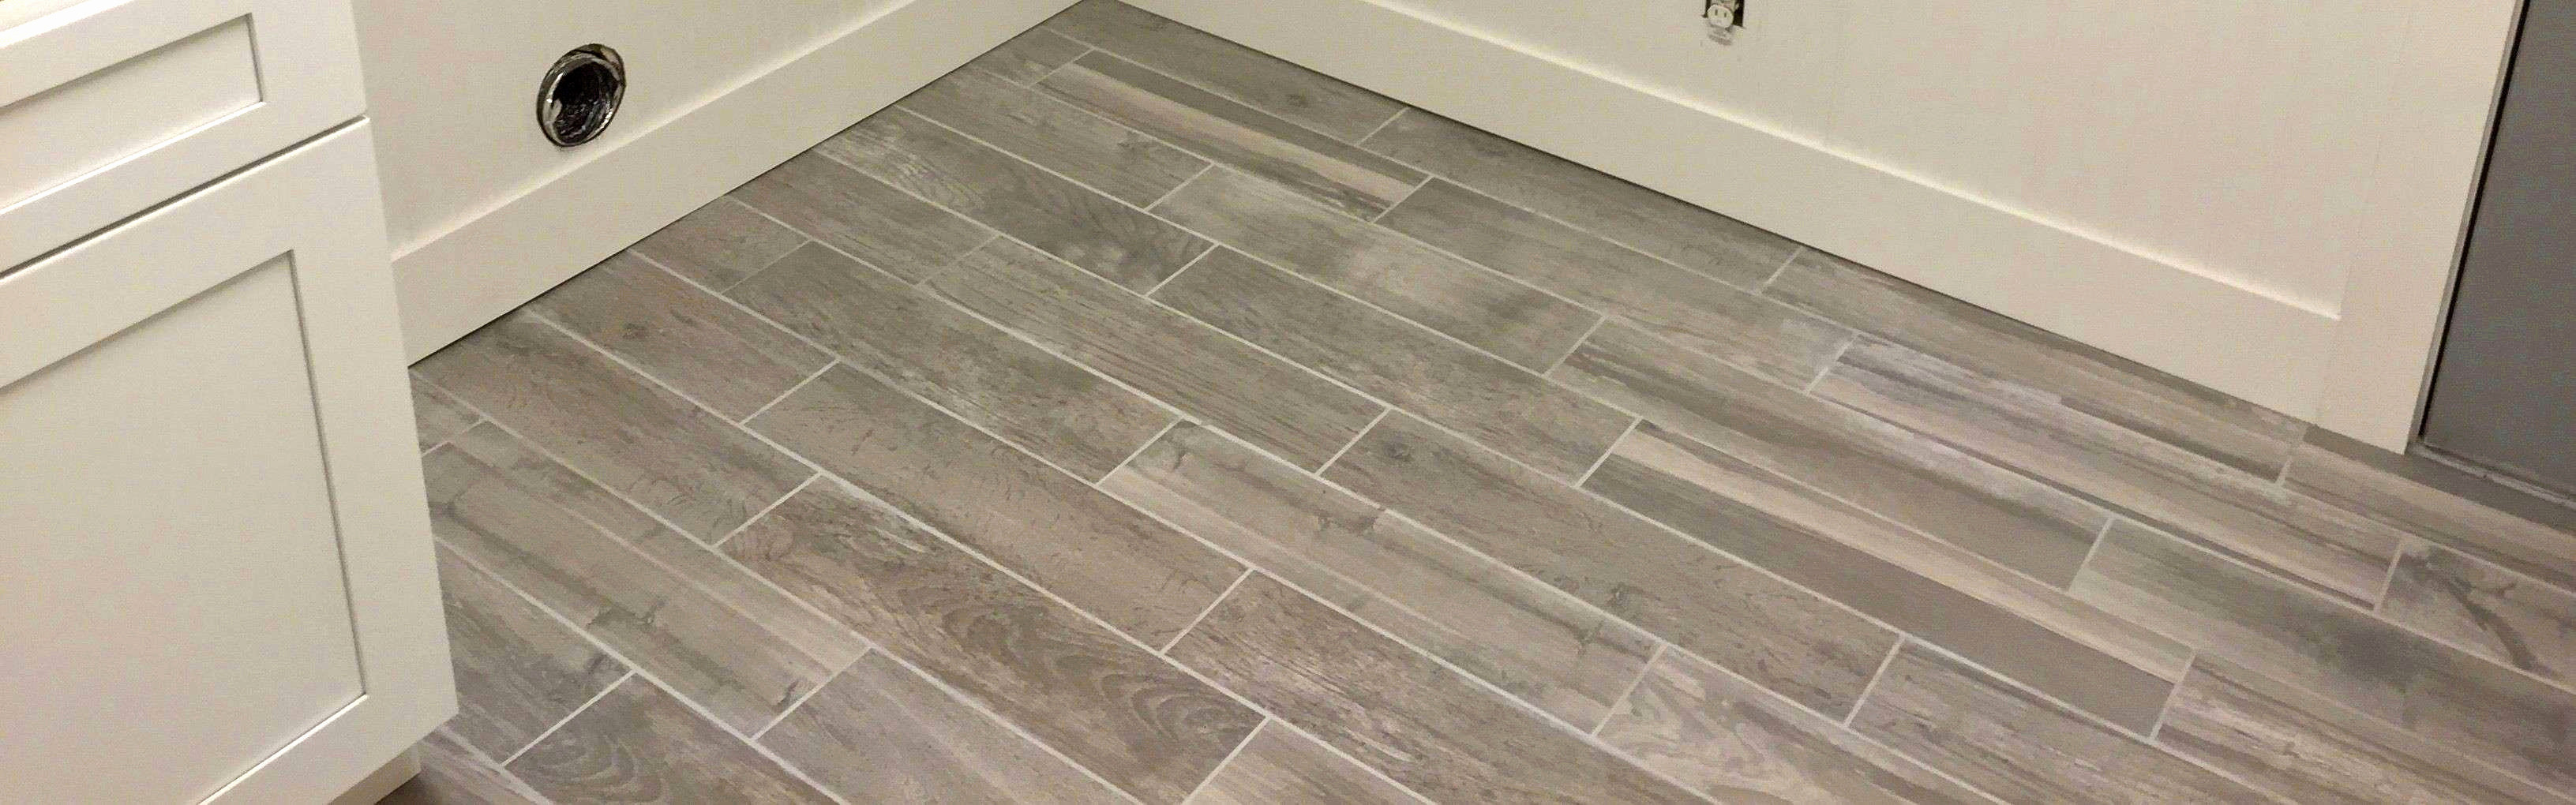 11 Popular How Much It Cost to Install Hardwood Floor 2024 free download how much it cost to install hardwood floor of wood floor installation cost floor plan ideas with regard to unique bathroom tiling ideas best h sink install bathroom i 0d exciting beautiful f